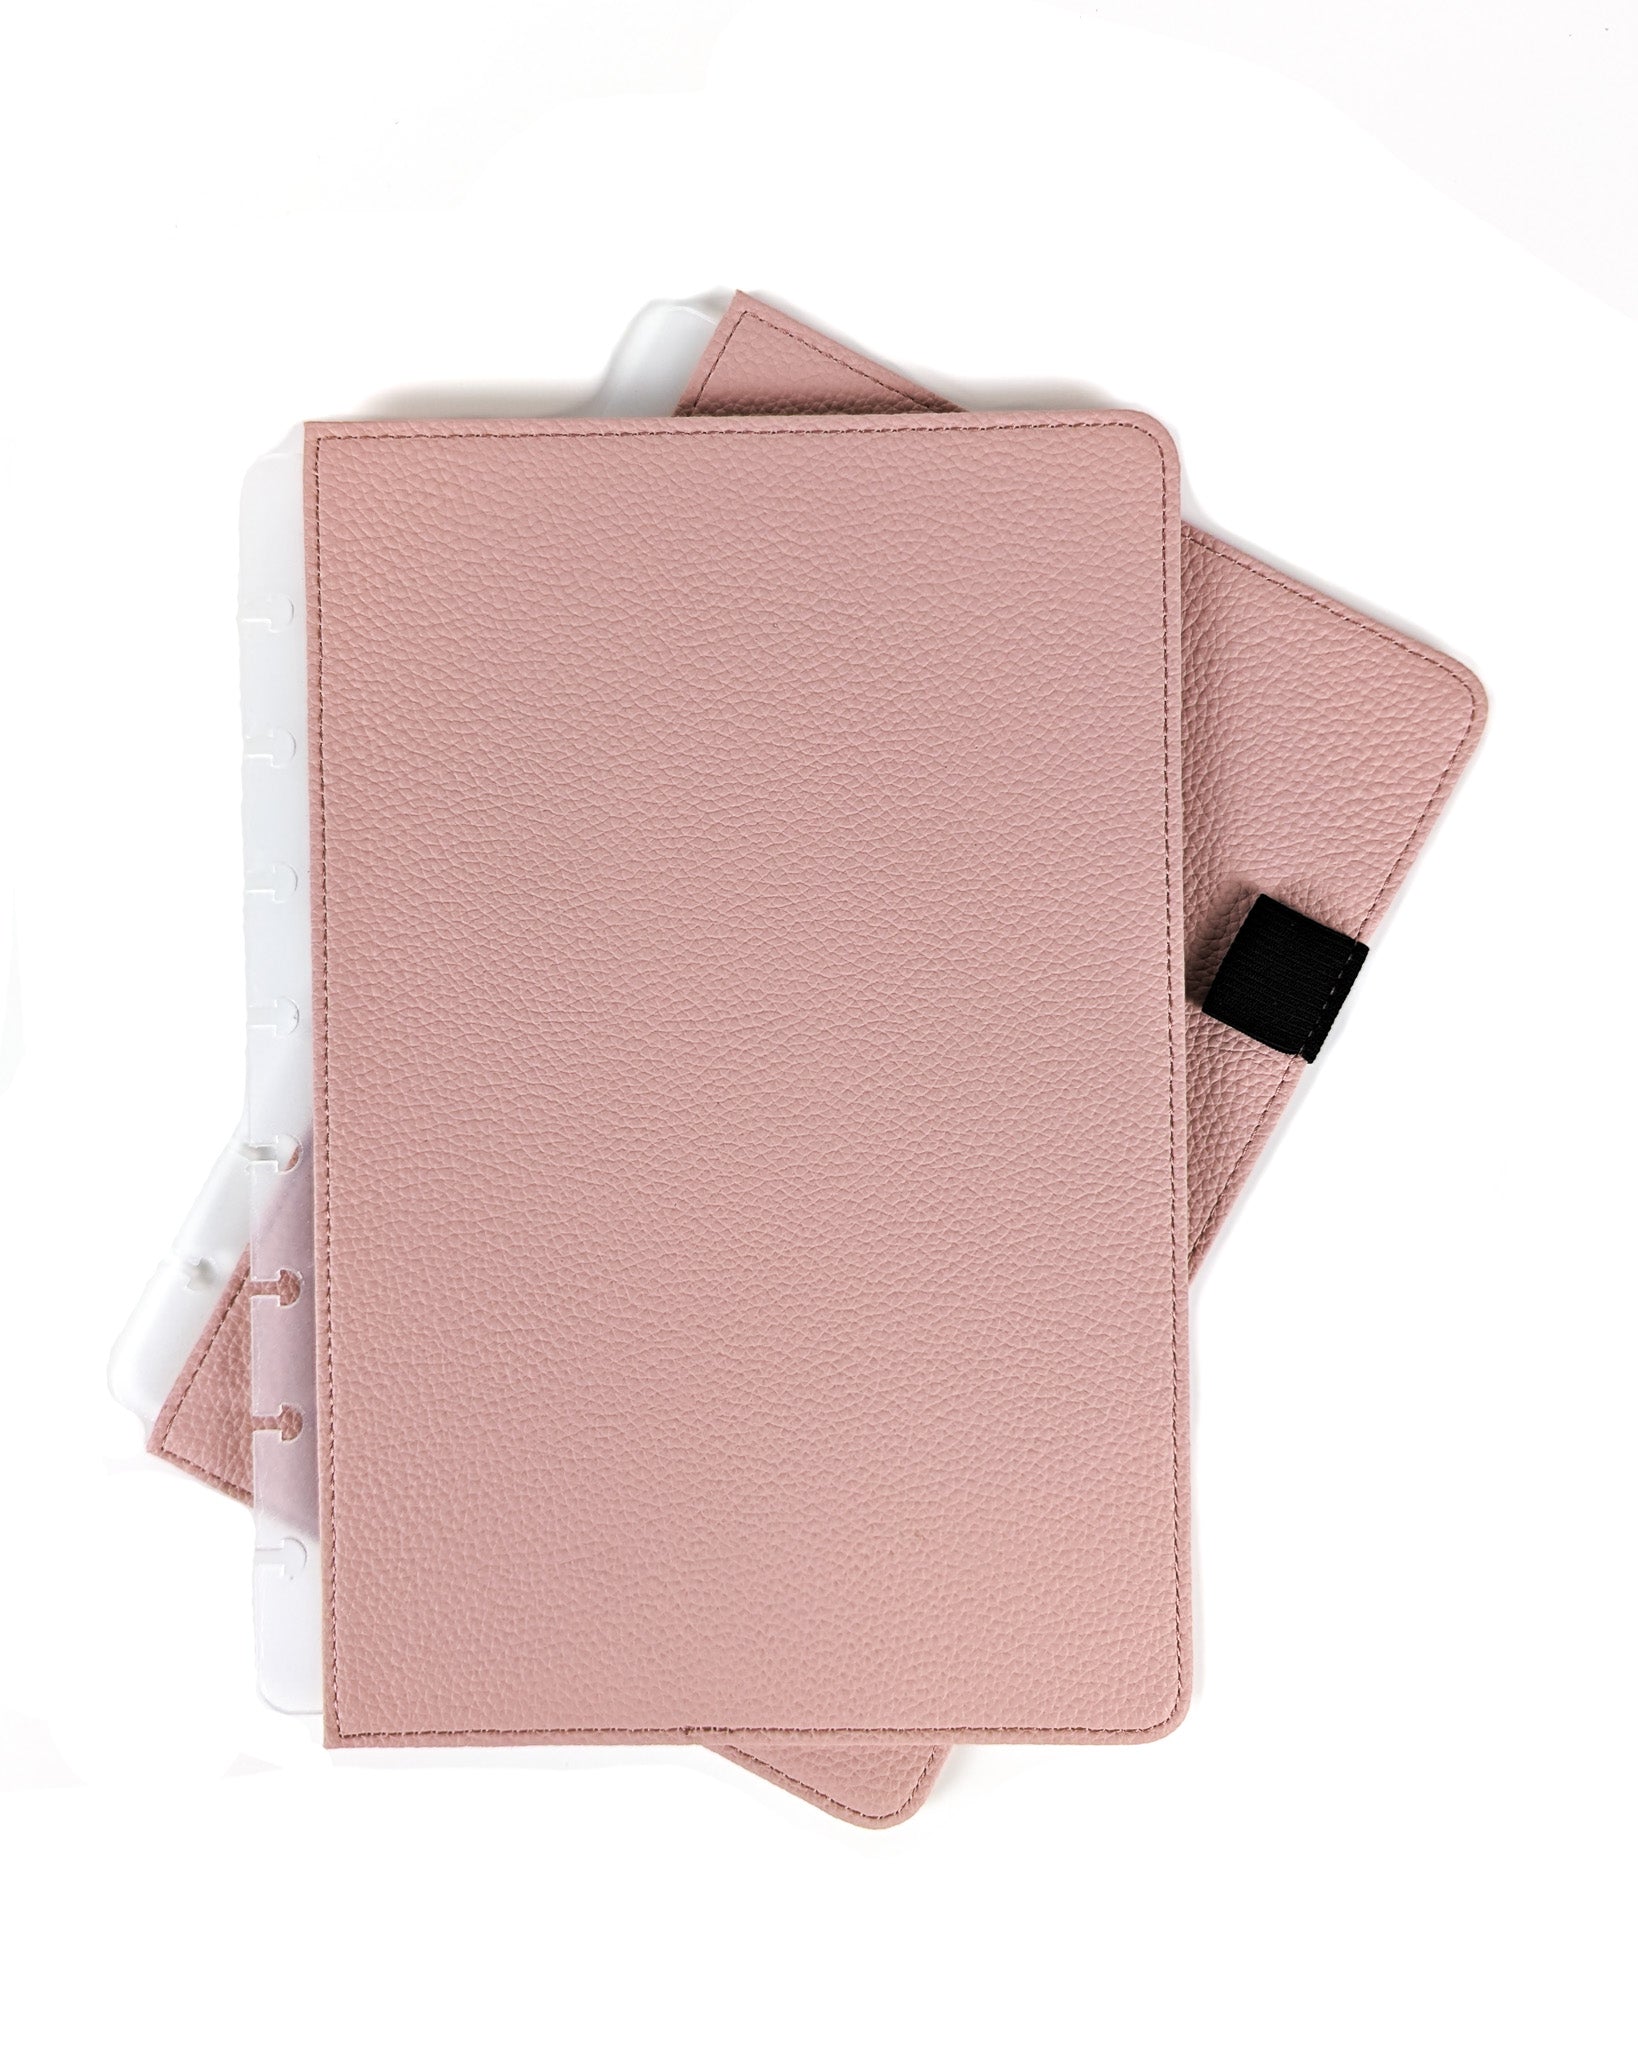 Blush pink vegan leather discbound planner cover by Jane's Agenda.